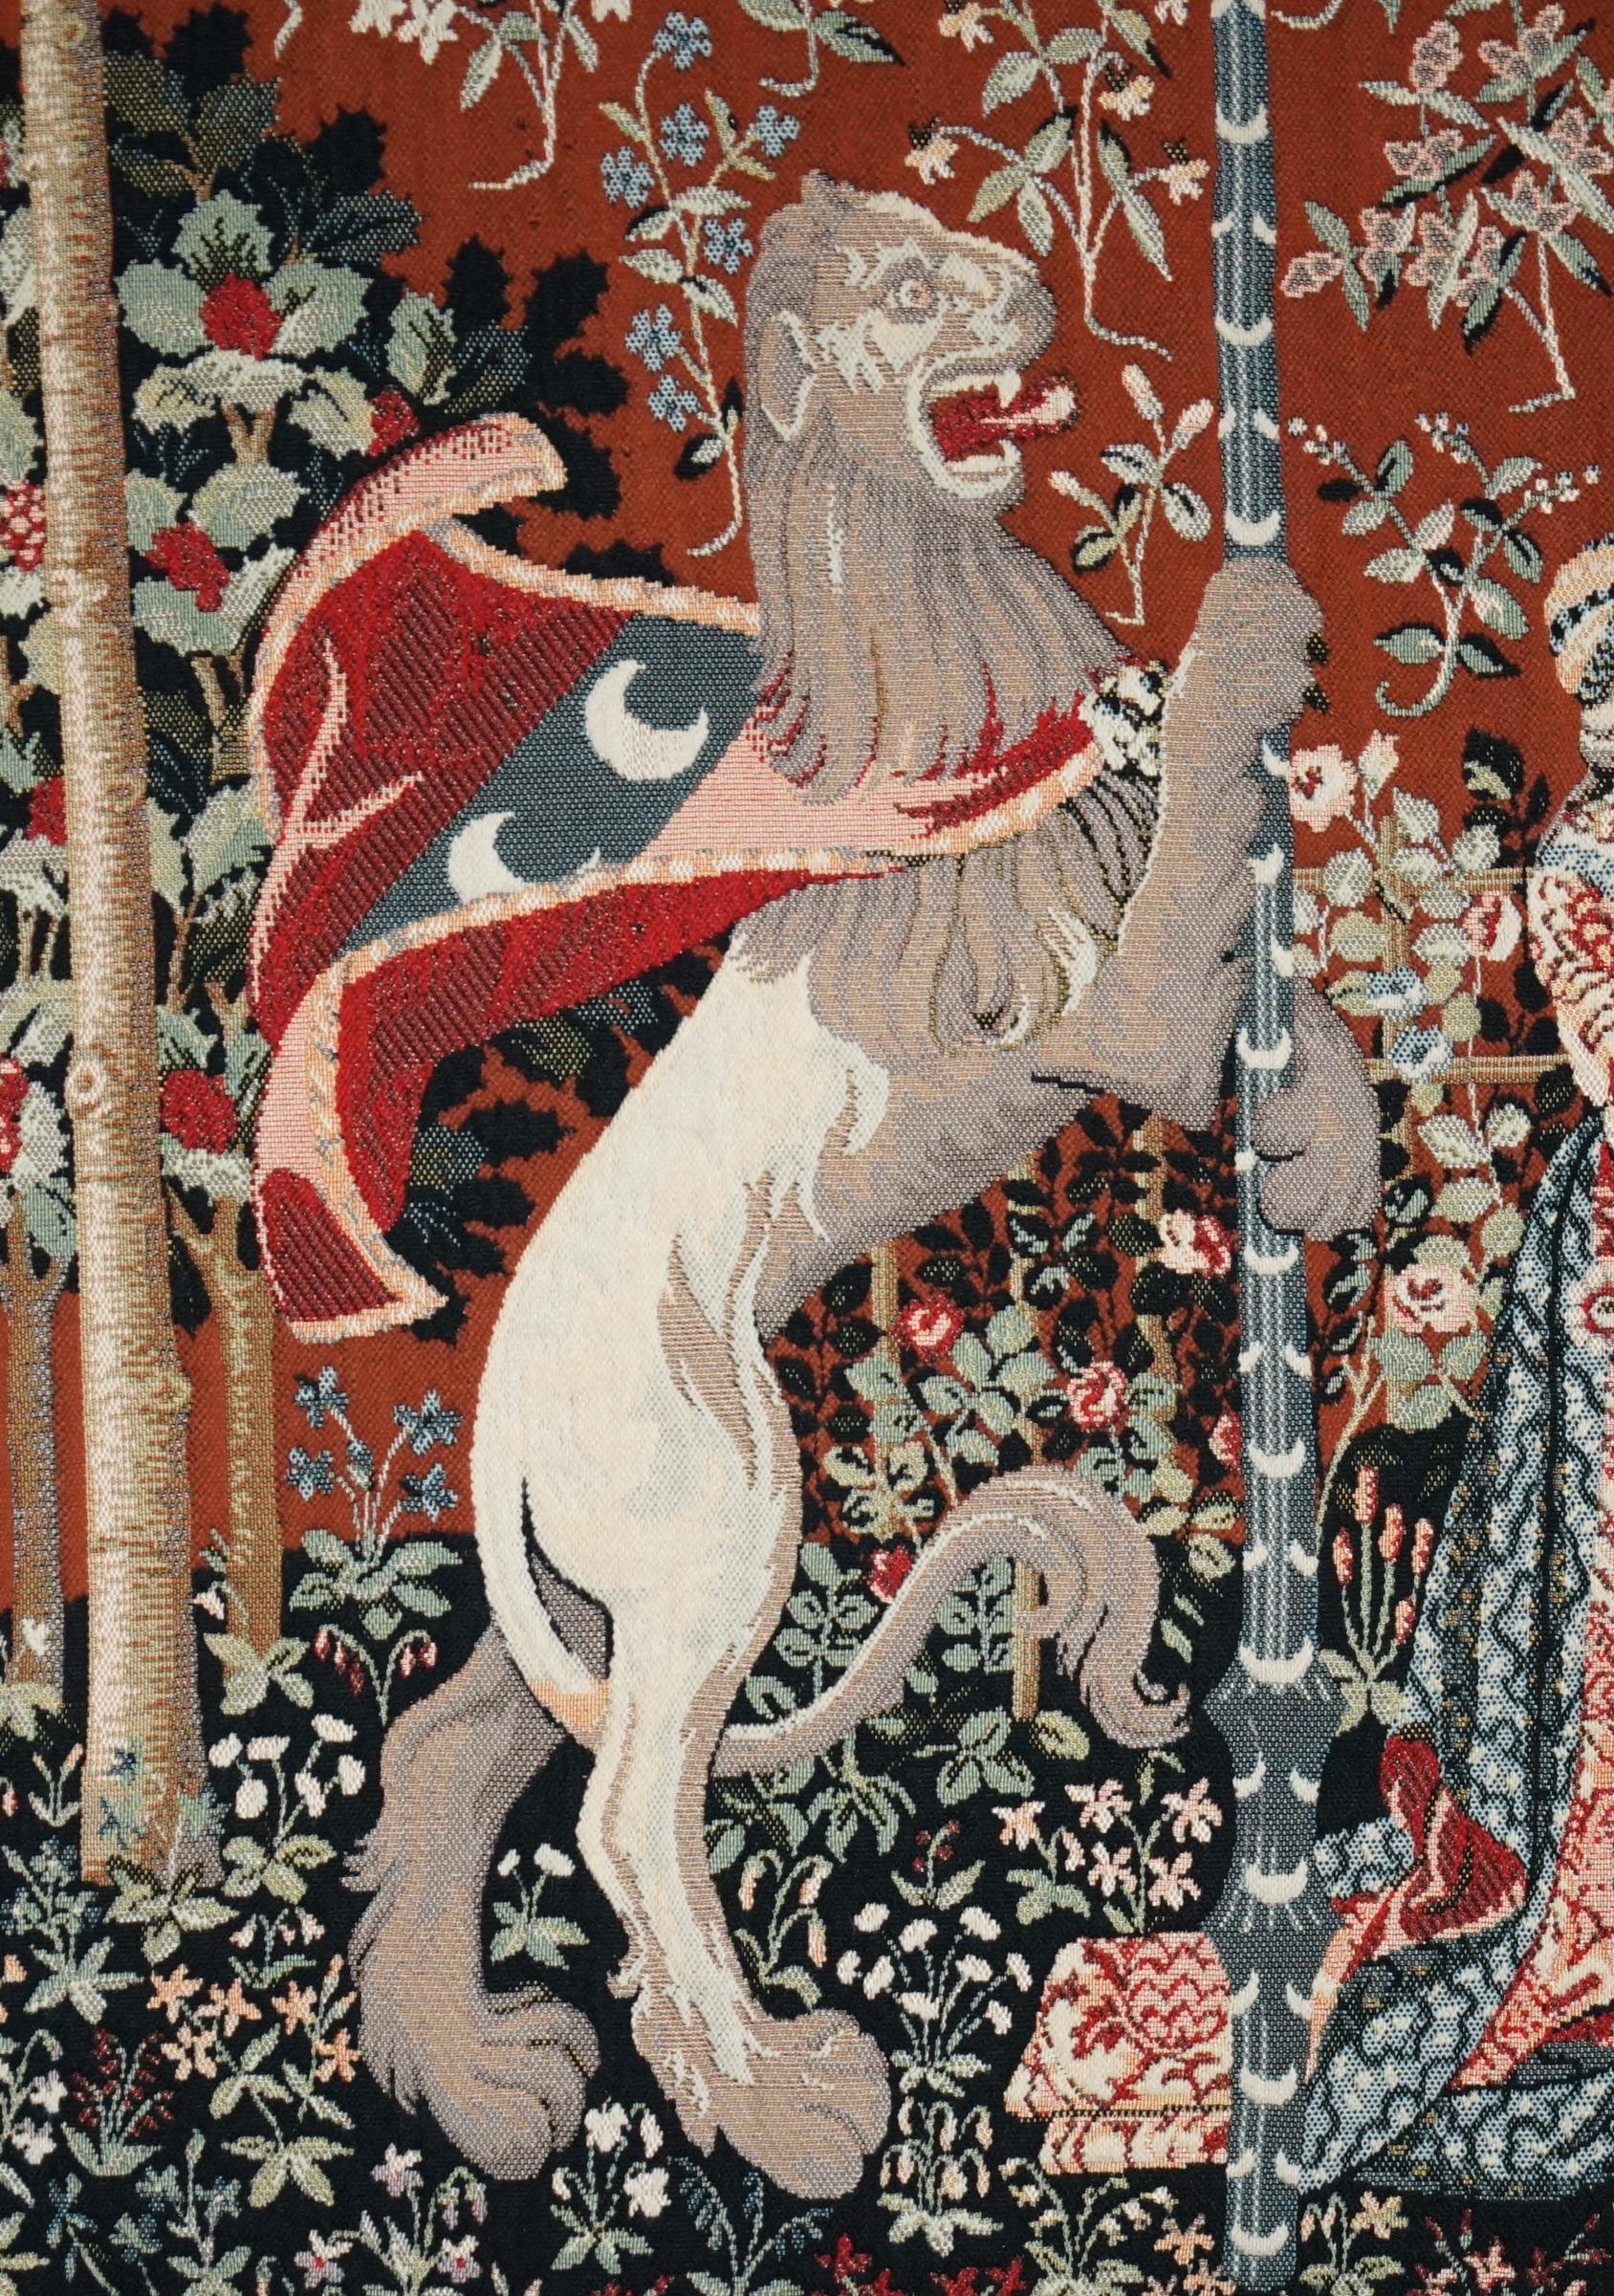 French ViNTAGE THE LADY AND THE UNICORN LARGE WALL HANGING WOVEN TAPESTRY 216CM X 189CM For Sale